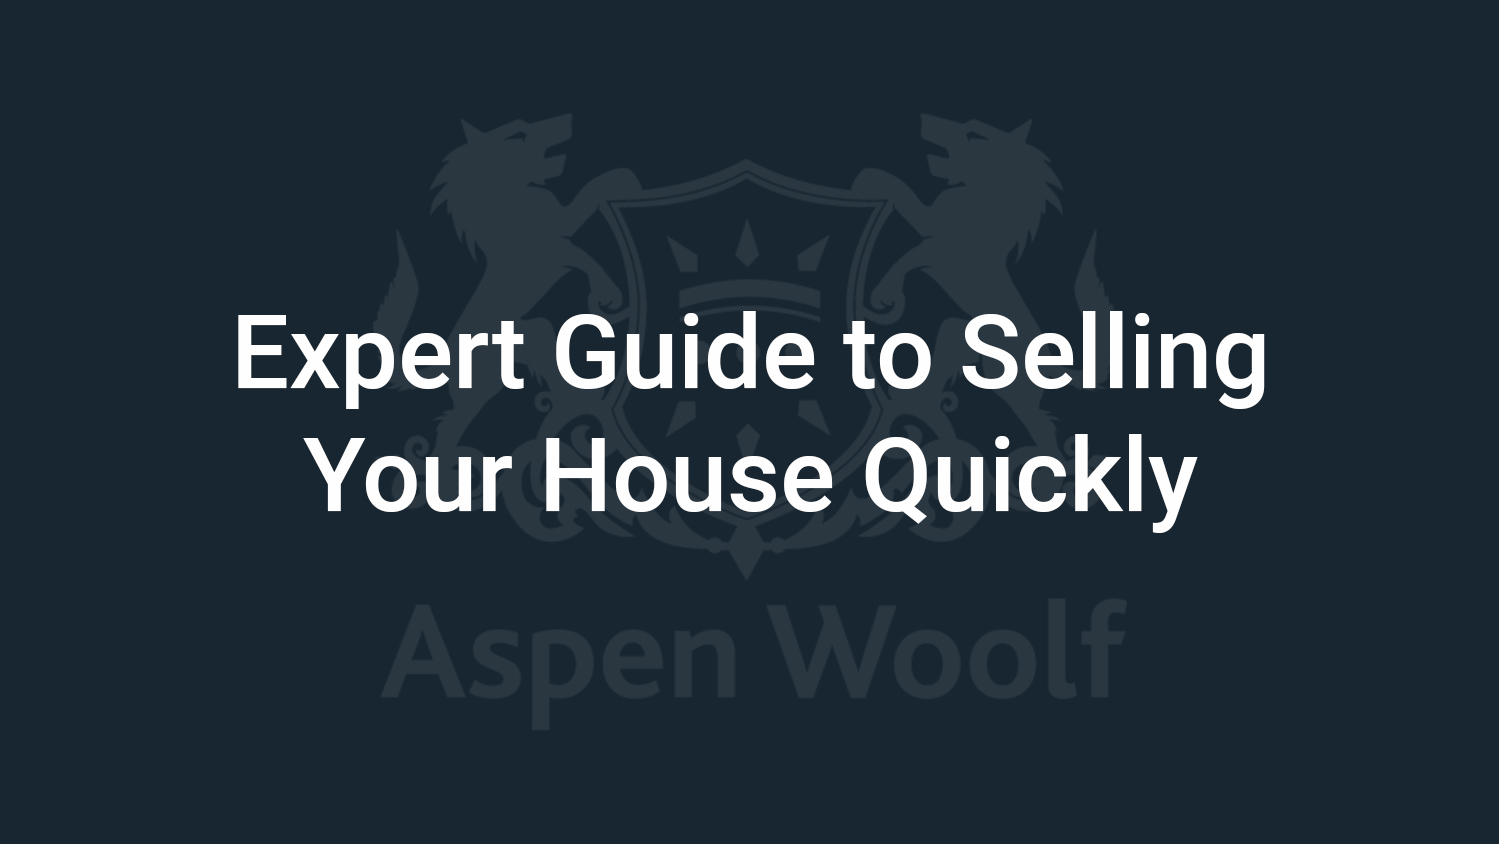 Expert Guide to Selling Your House Quickly